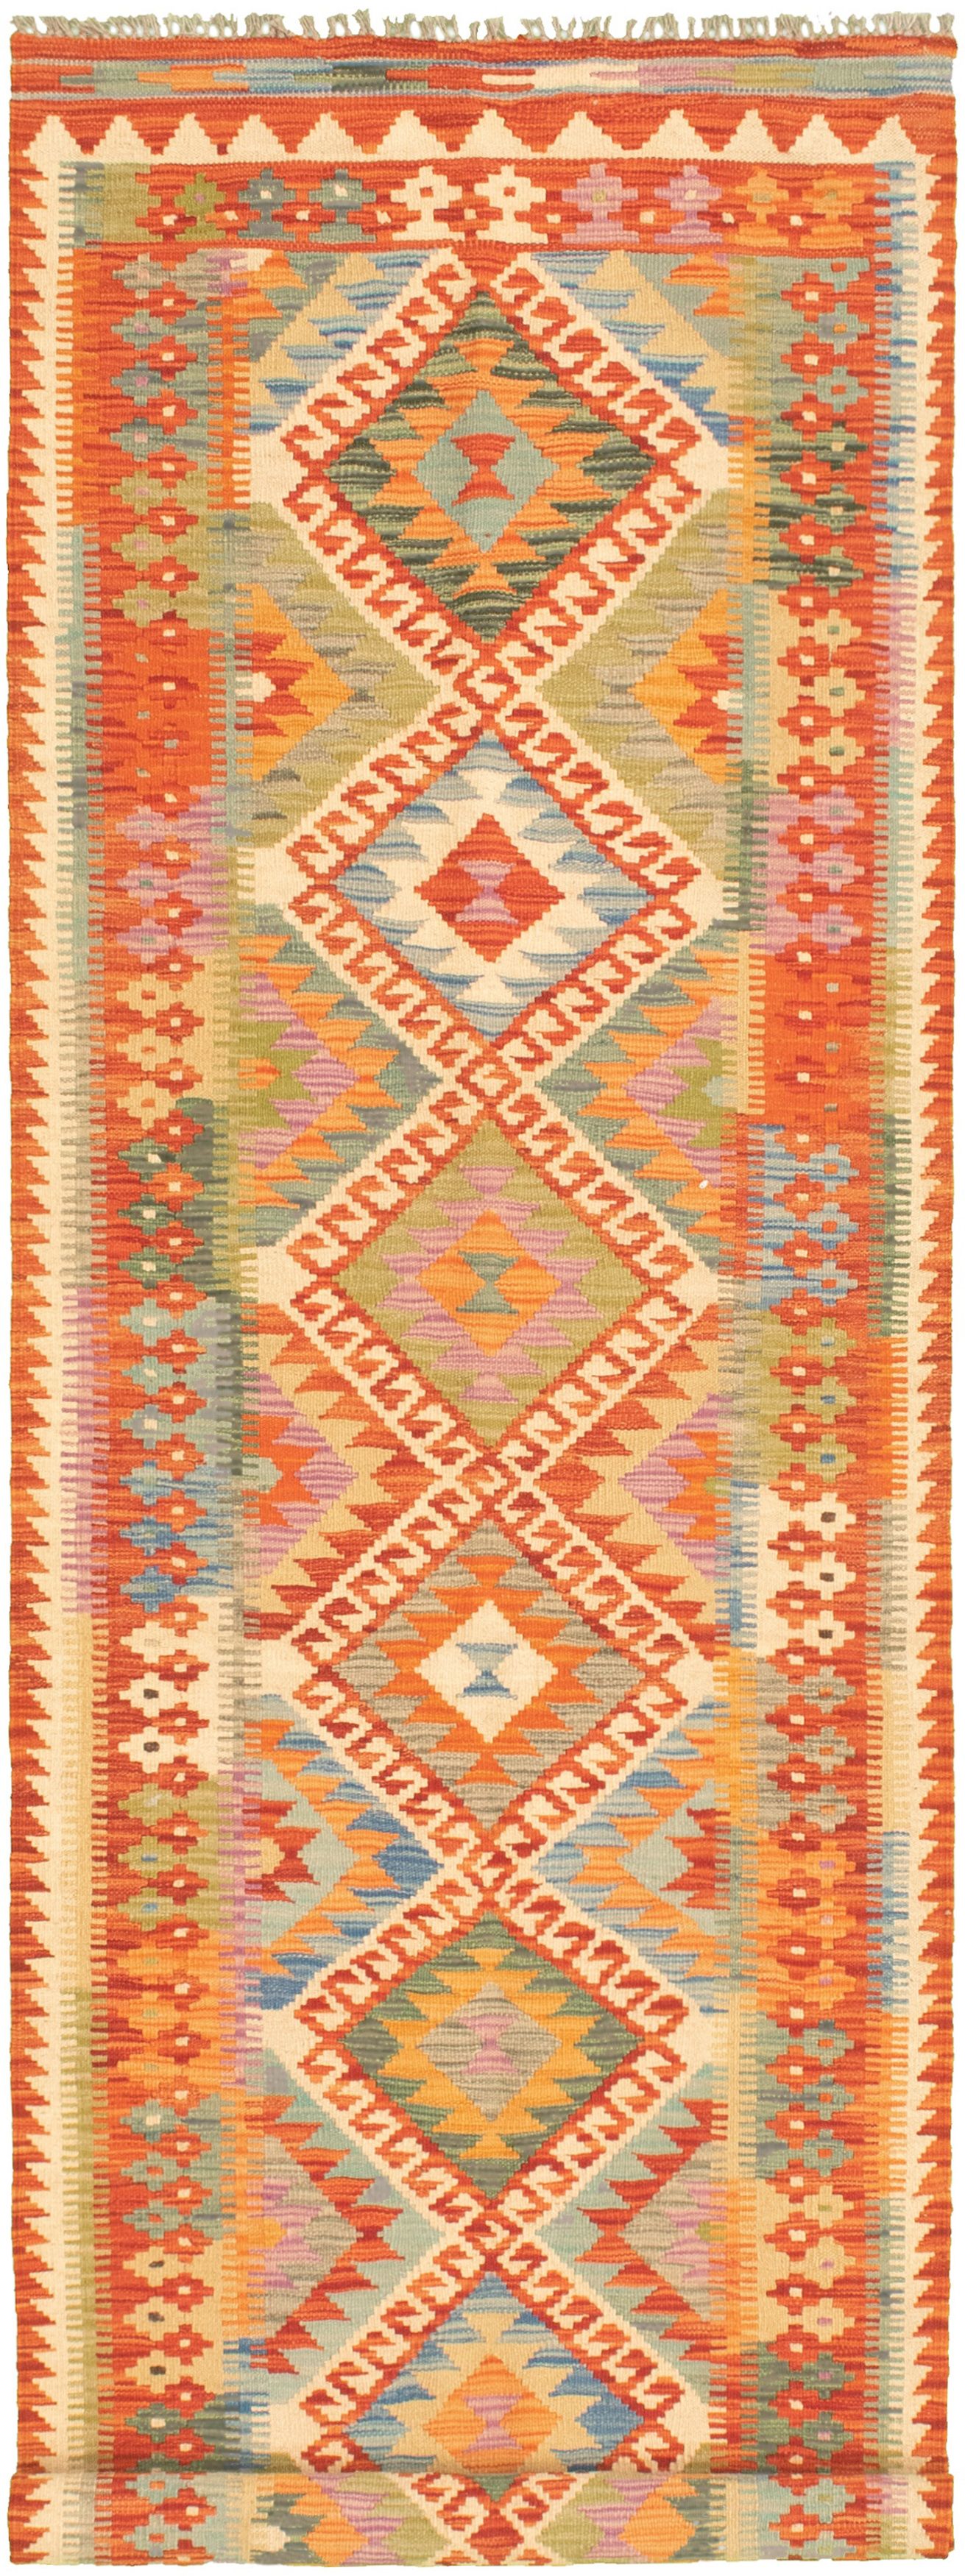 Hand woven Bold and Colorful  Dark Copper Wool Kilim 2'9" x 9'10" Size: 2'9" x 9'10"  